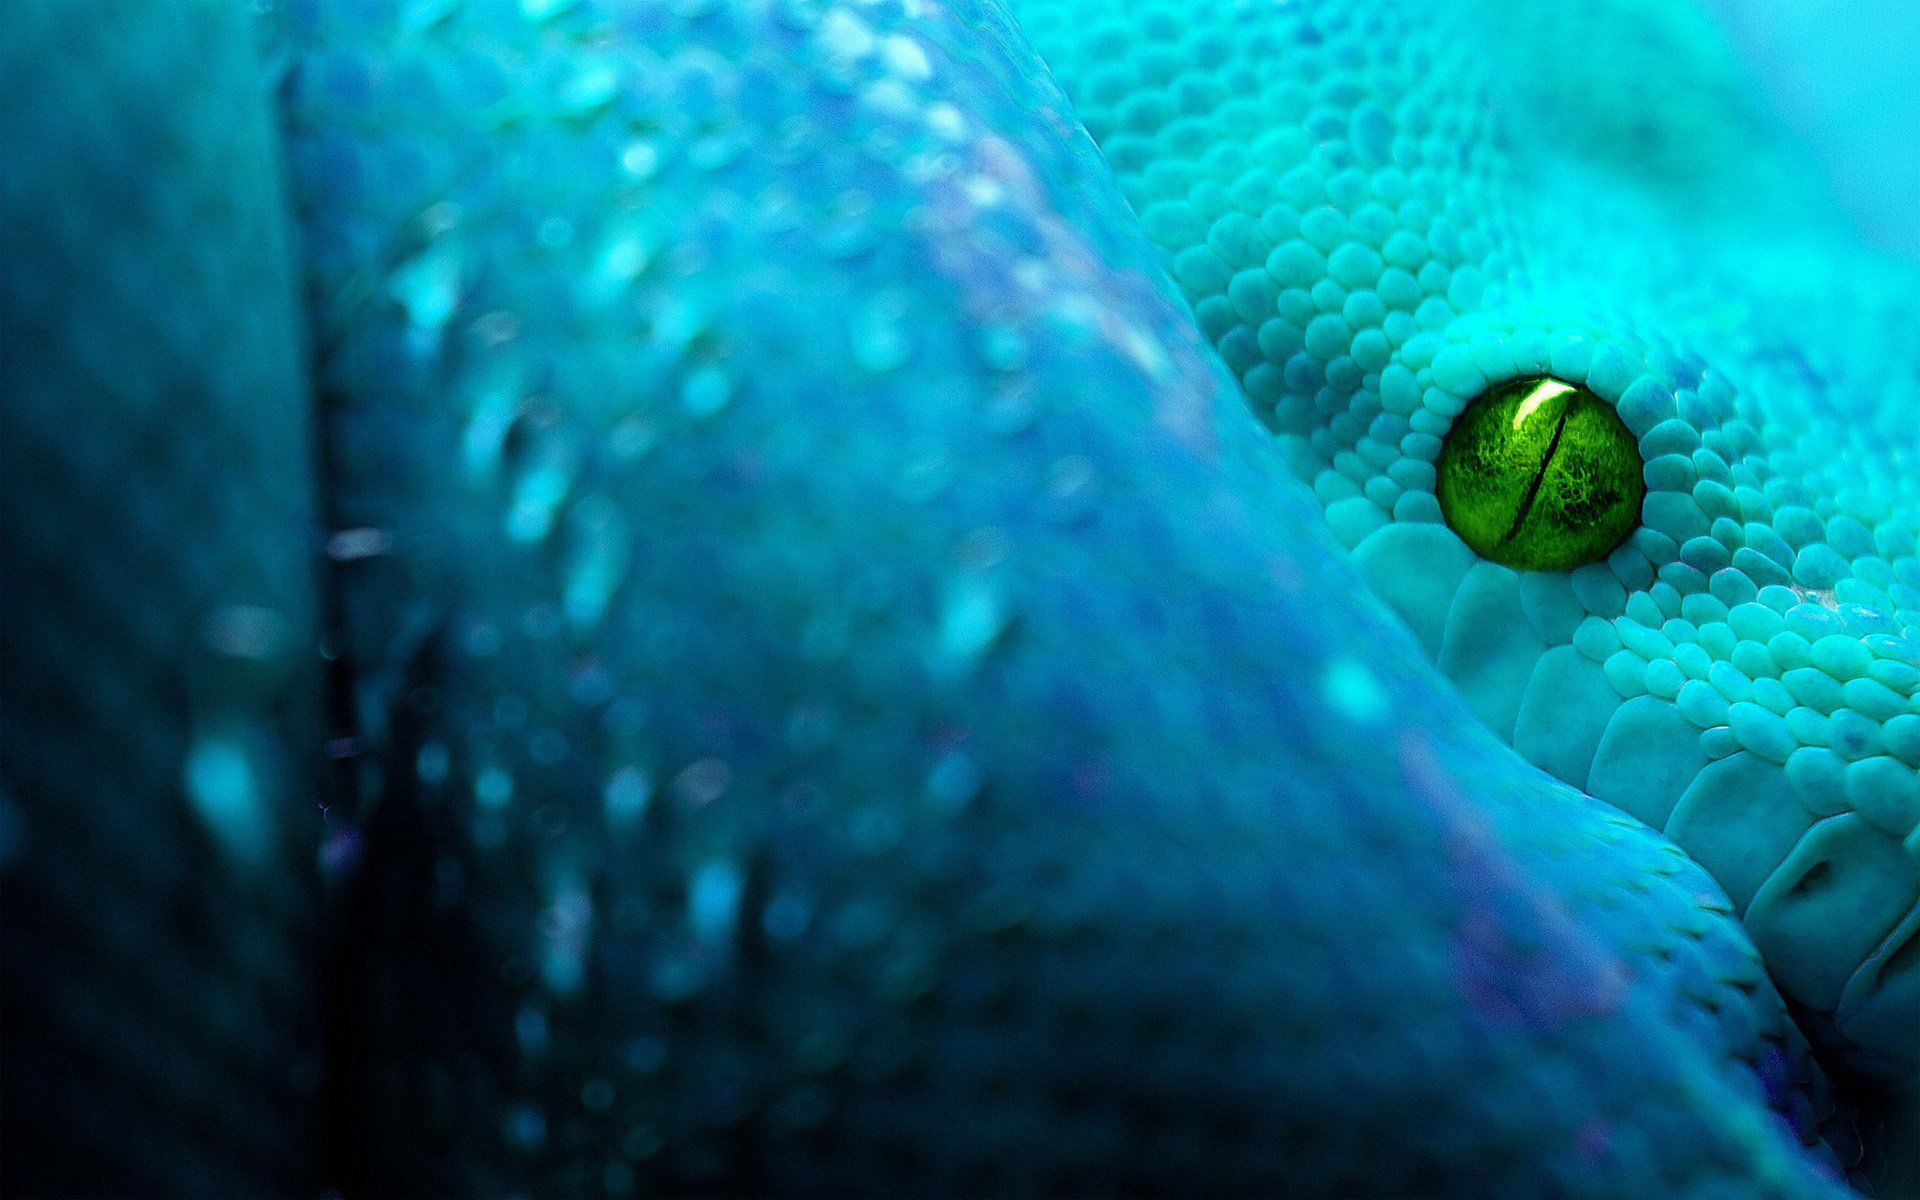 A blue snake's eye is shown in close up. - Snake, teal